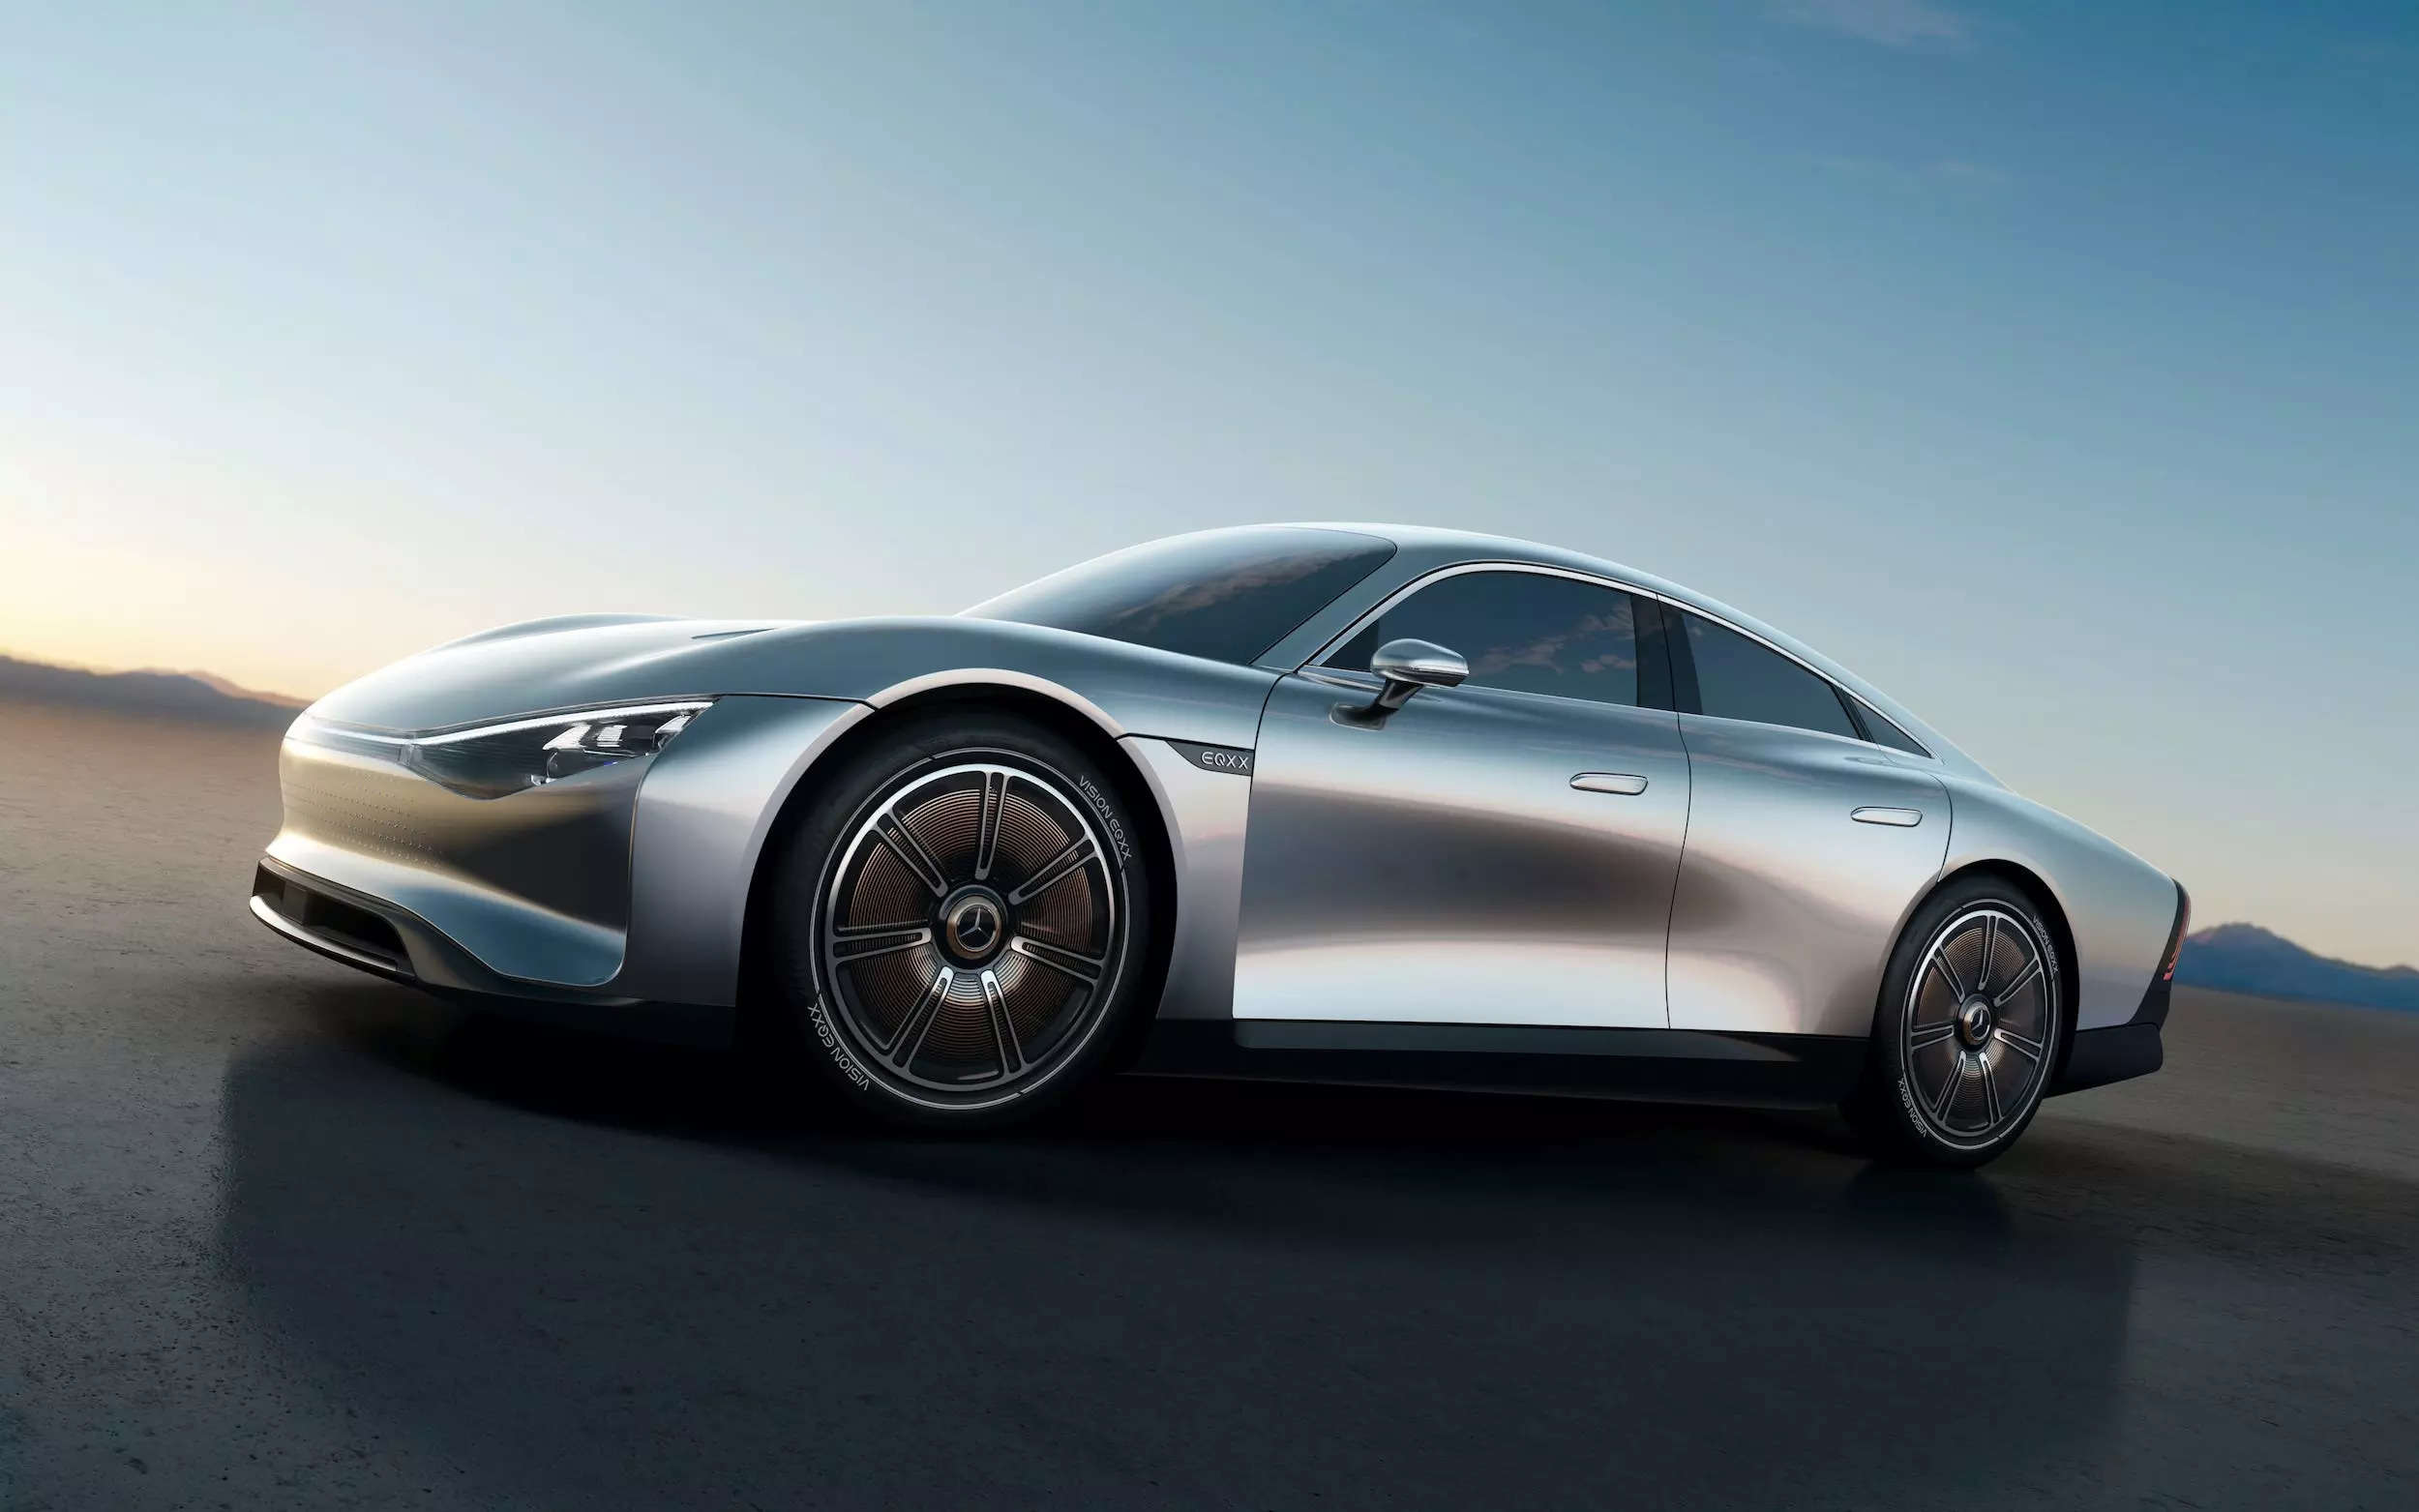 From a color-changing BMW to a Mercedes that beats Tesla, take a tour of the coolest electric cars revealed this month